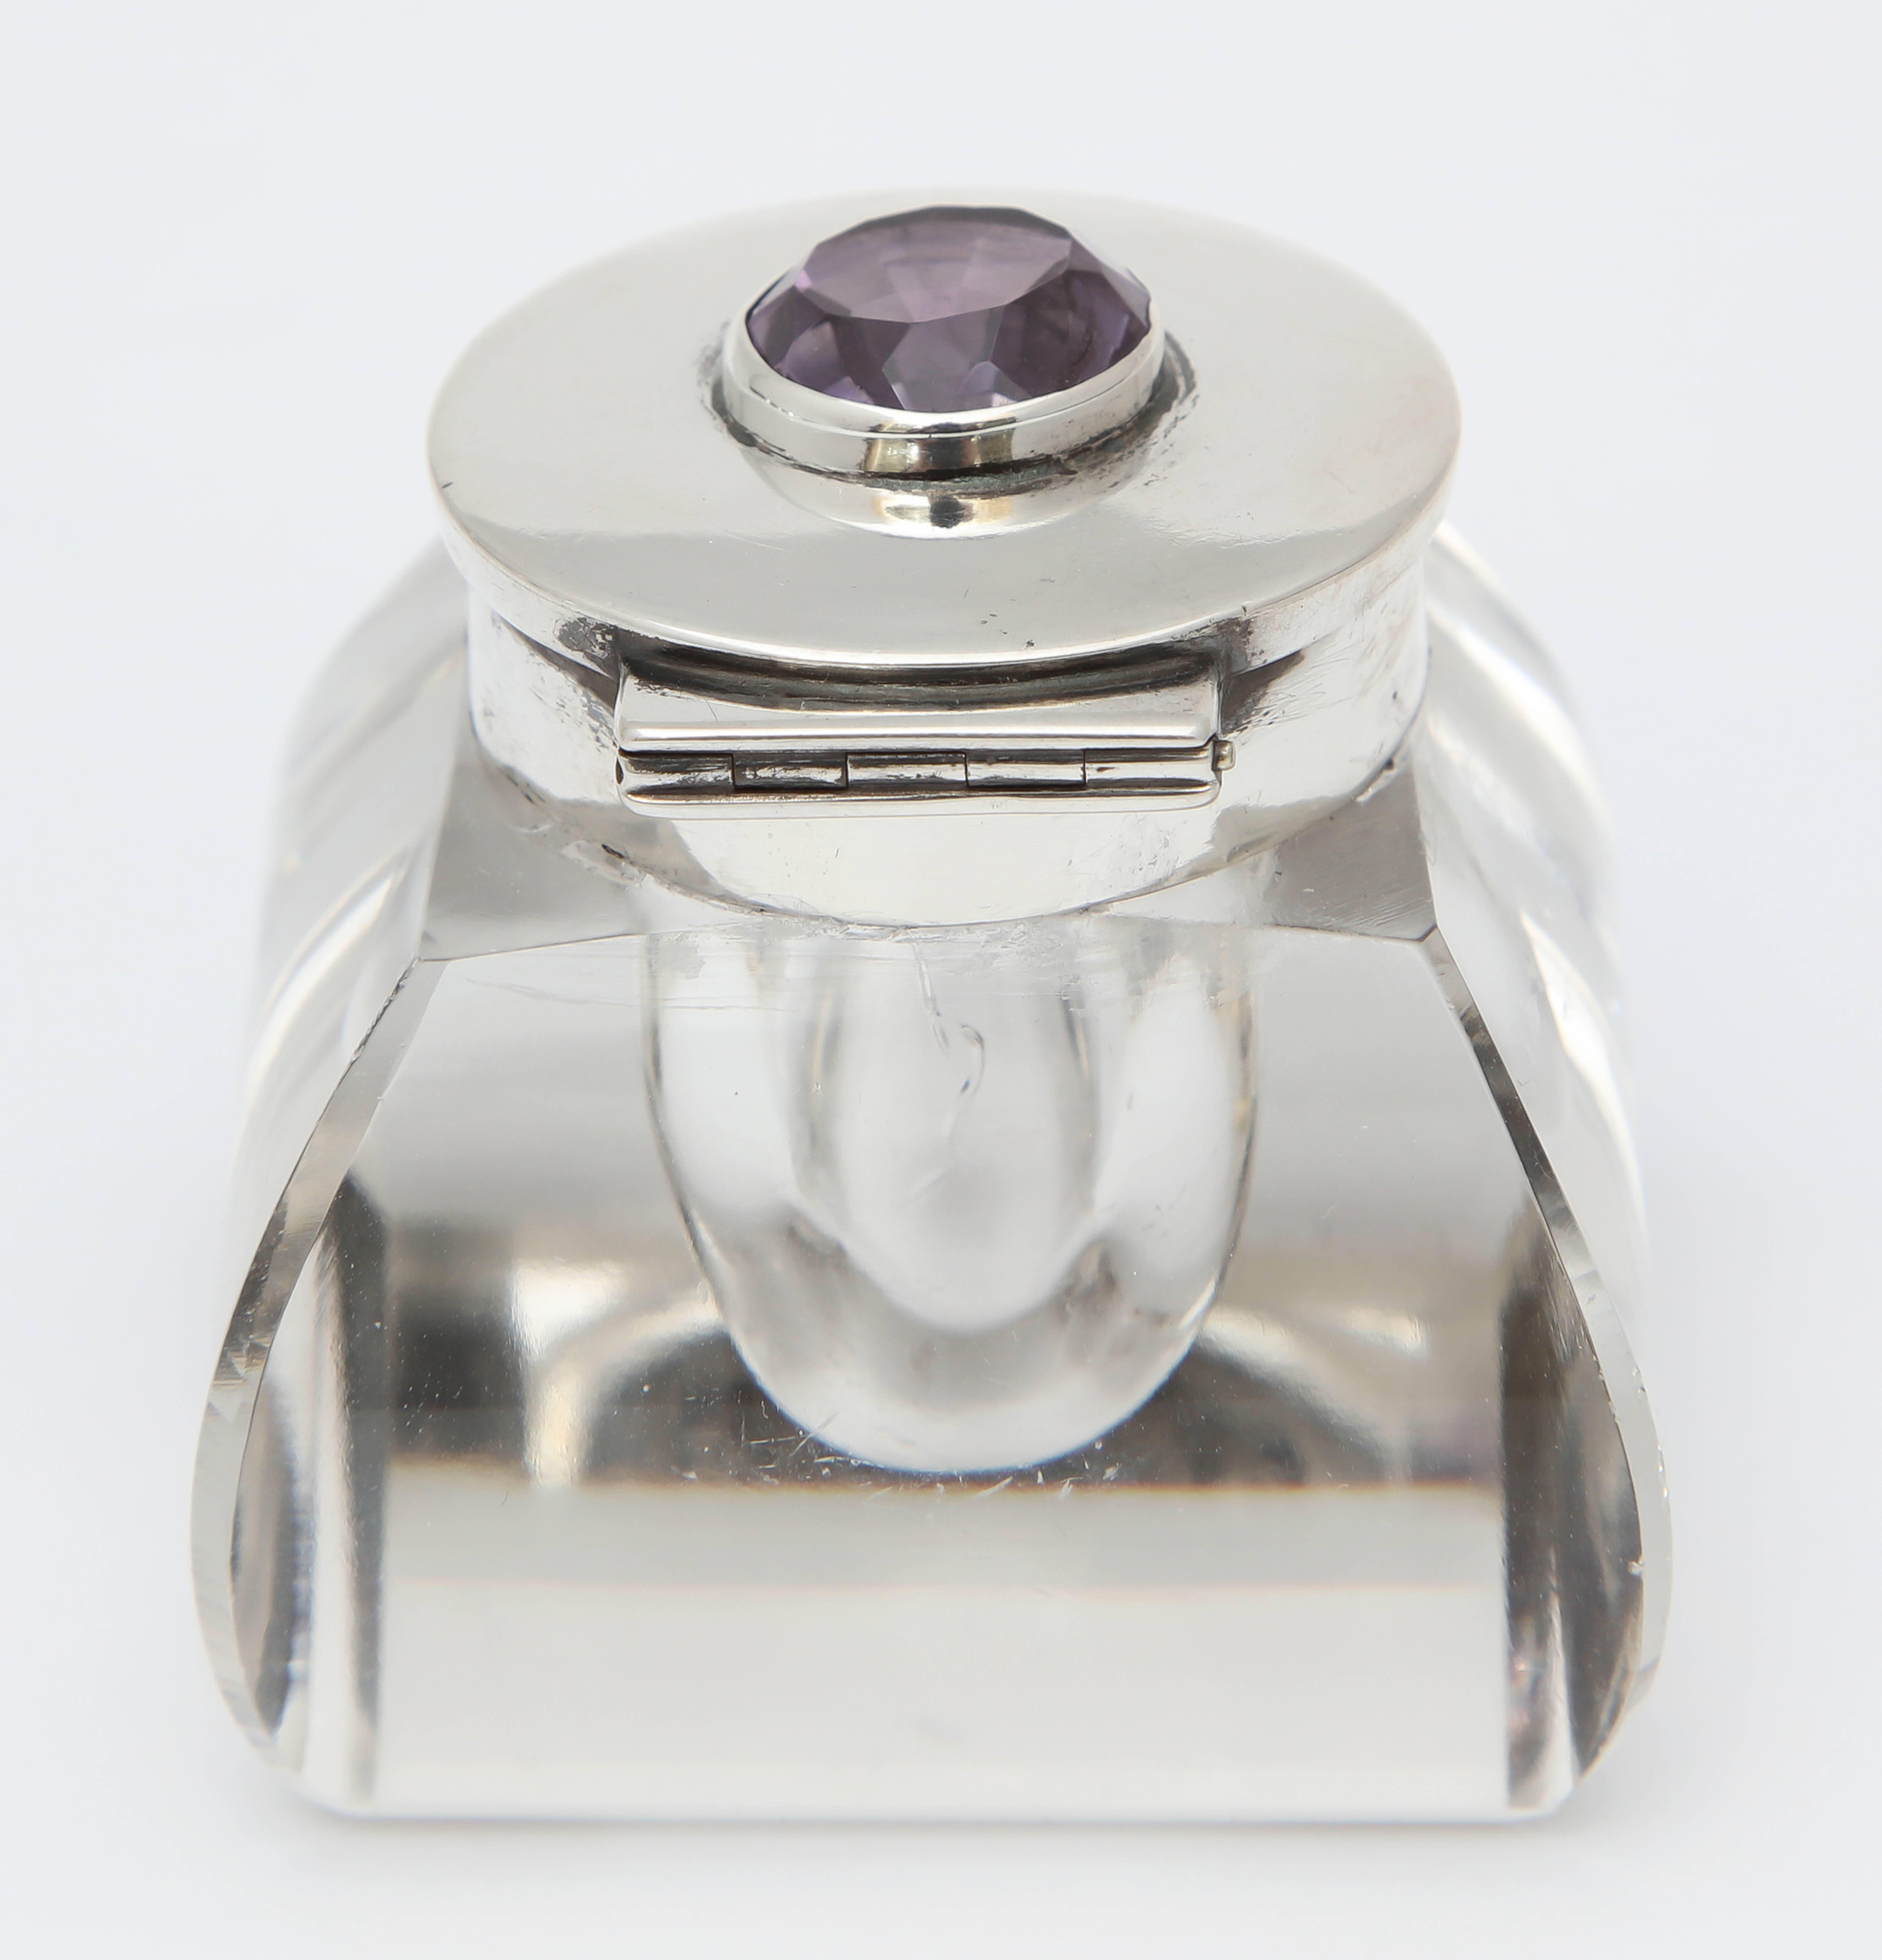 Amethyst Beautiful Edwardian Sterling Silver-Mounted Crystal Inkwell with Hinged Lid